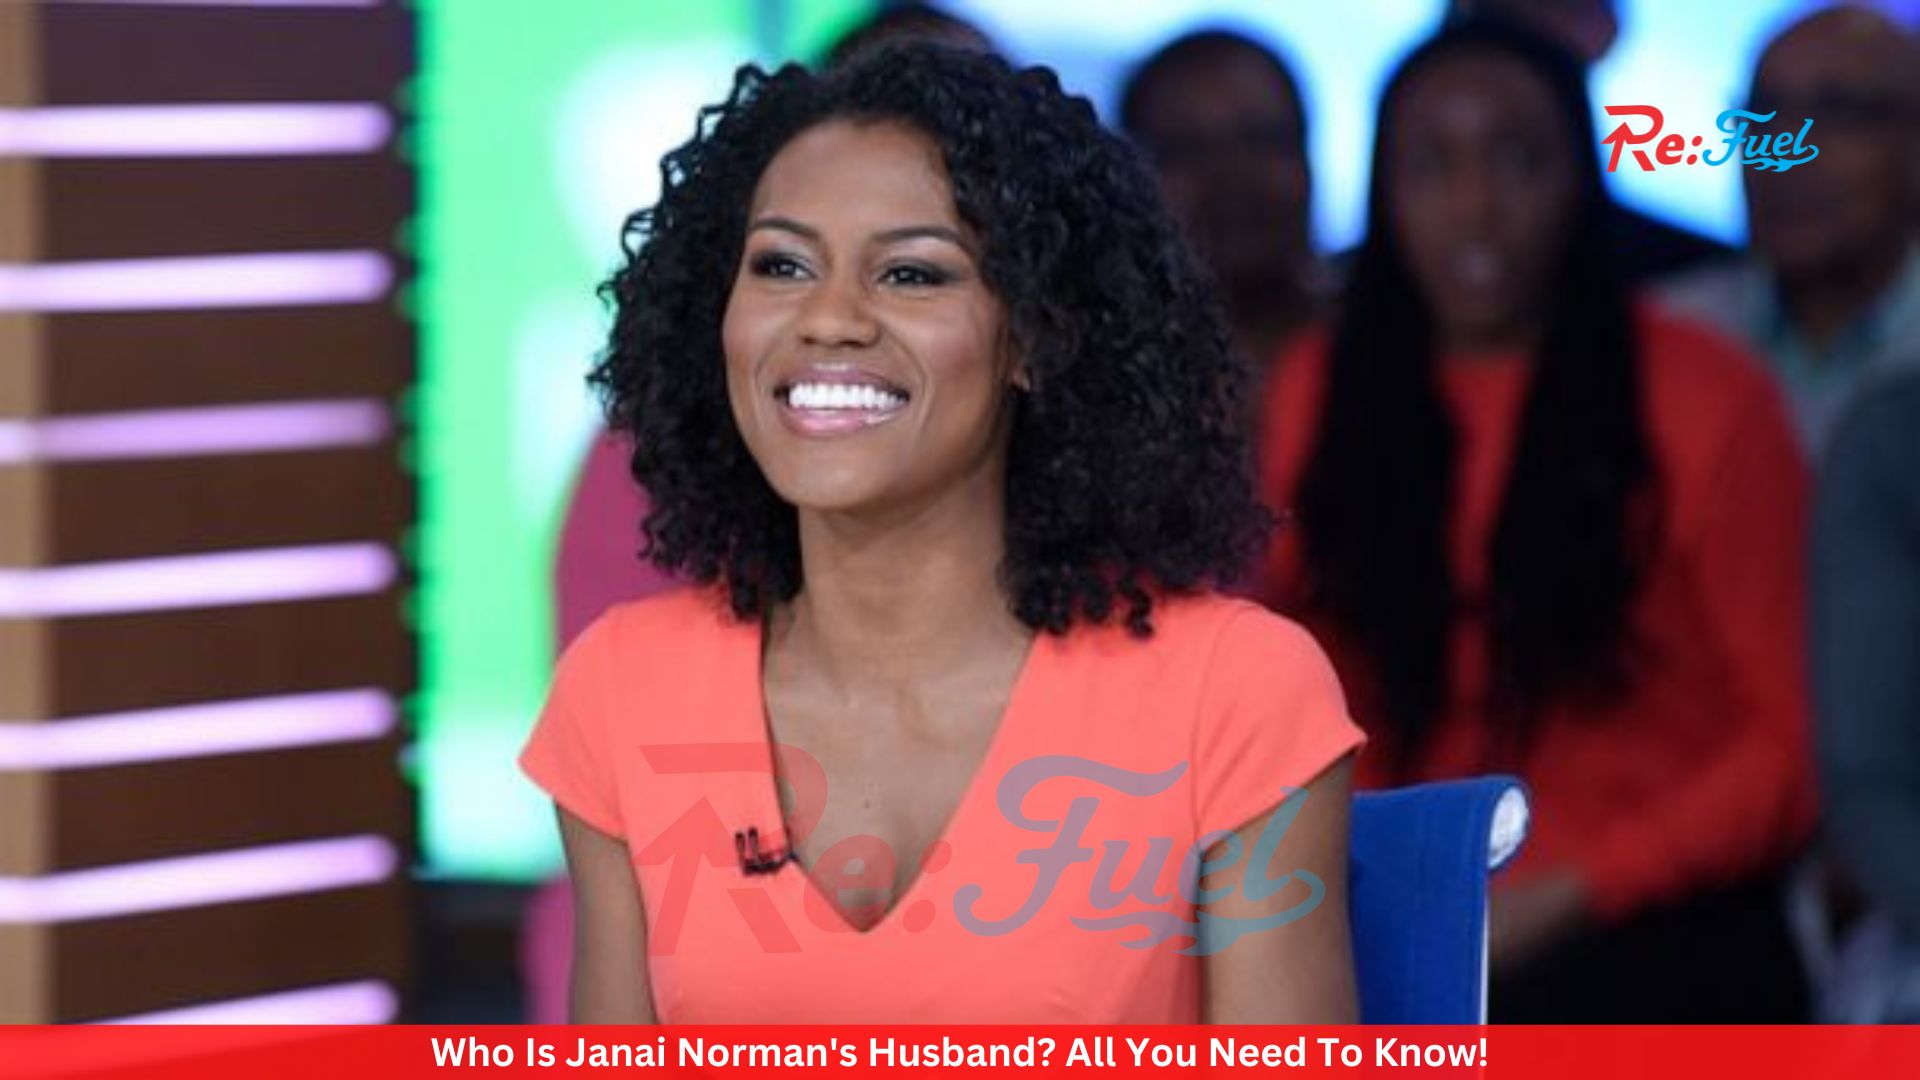 Who Is Janai Norman's Husband? All You Need To Know!